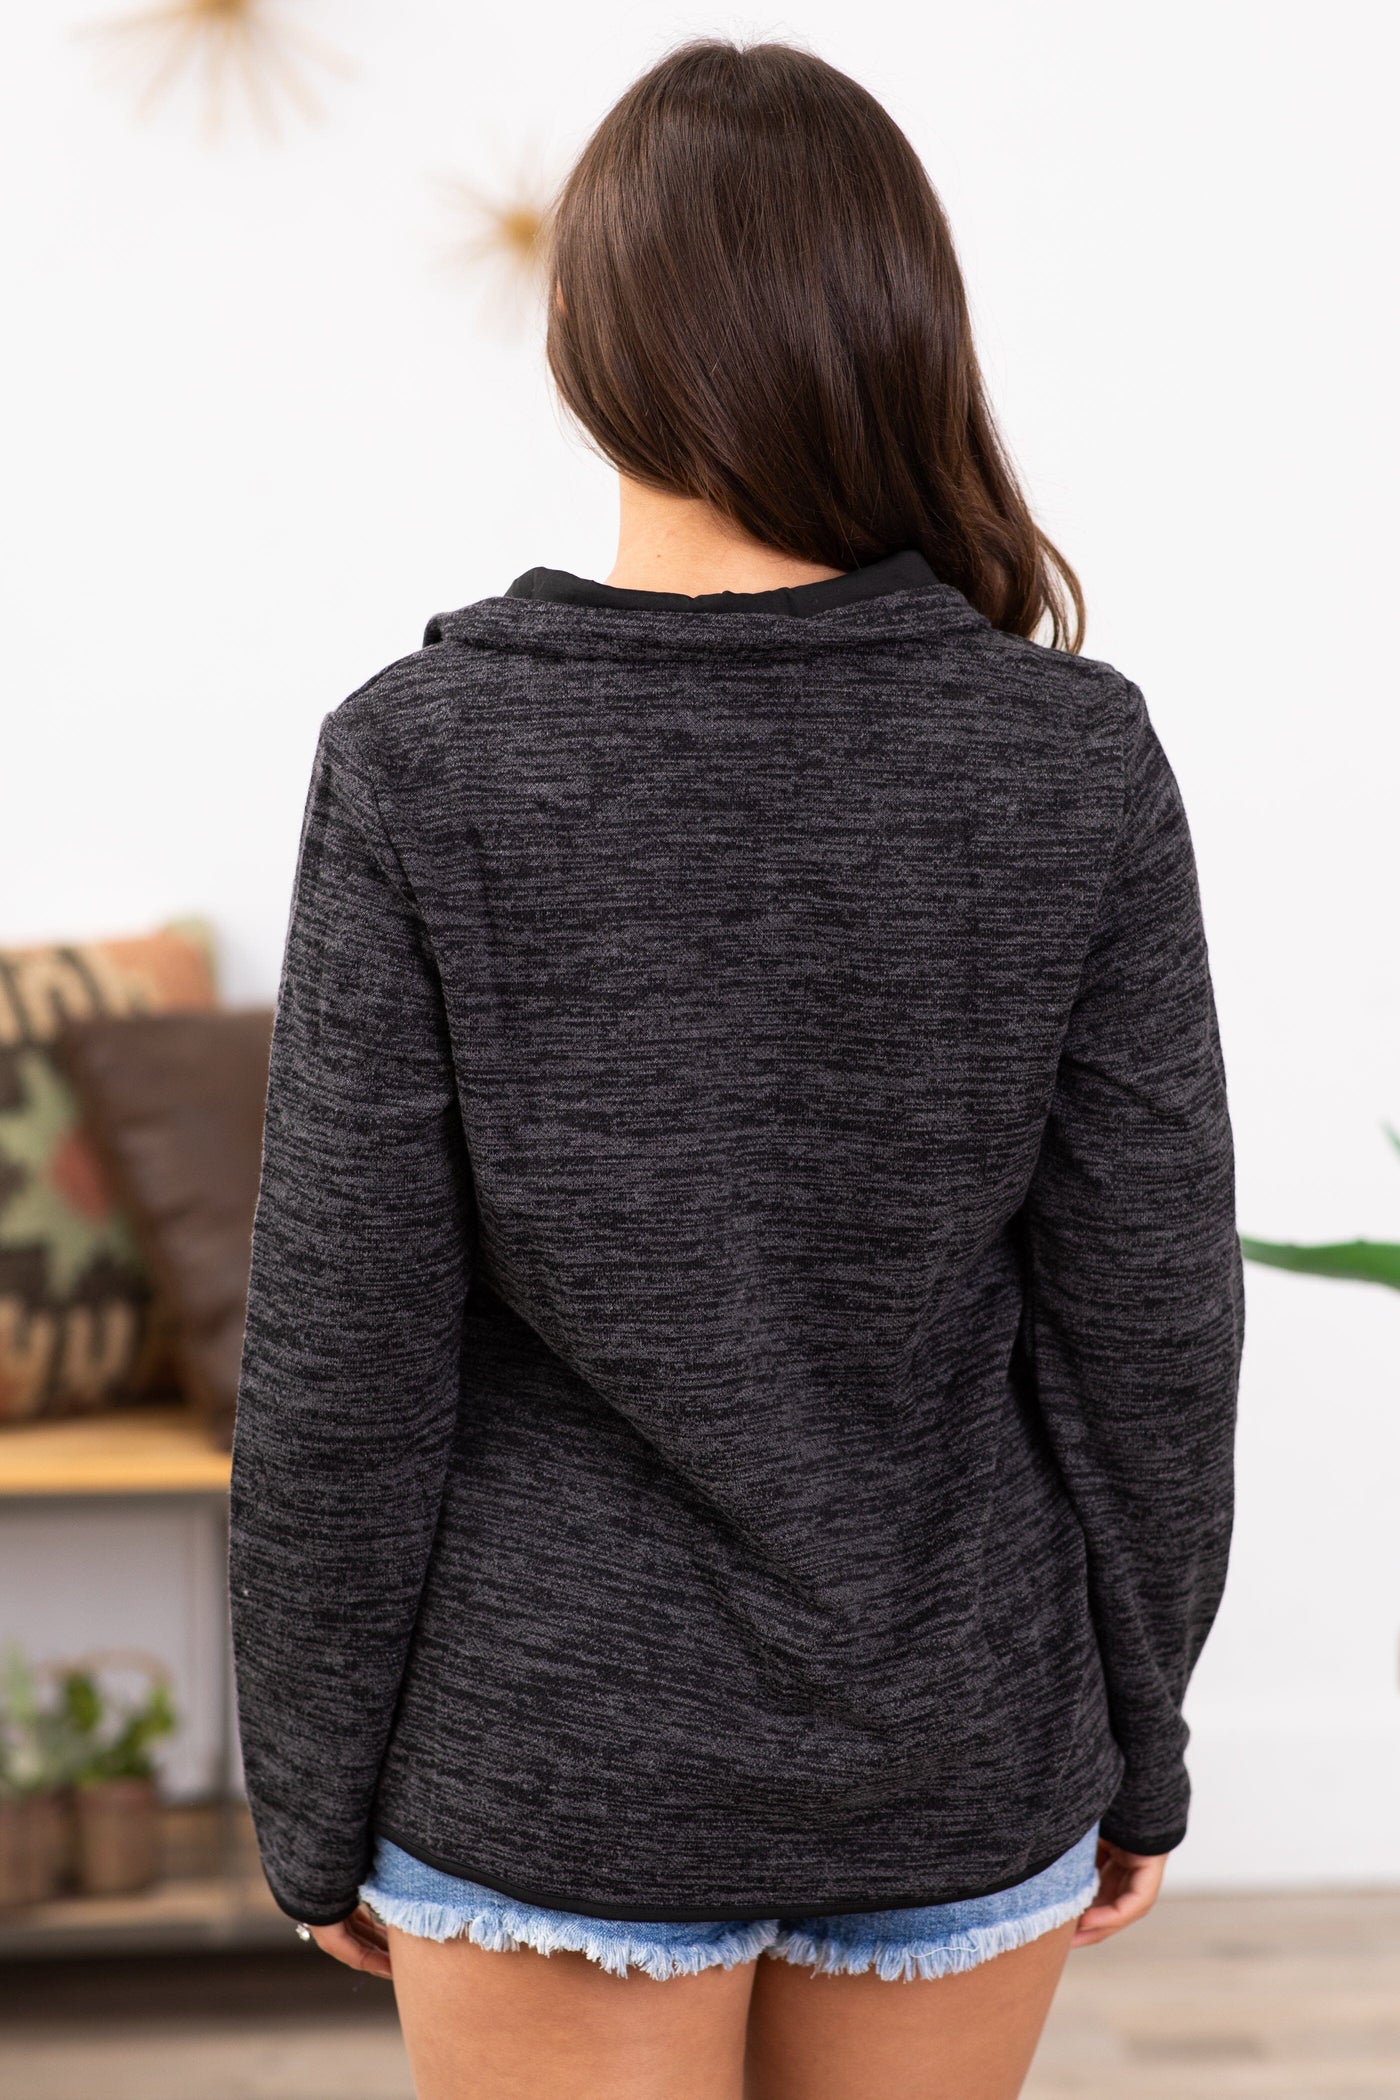 Charcoal Heathered 1/4 Zip Pull Over - Filly Flair